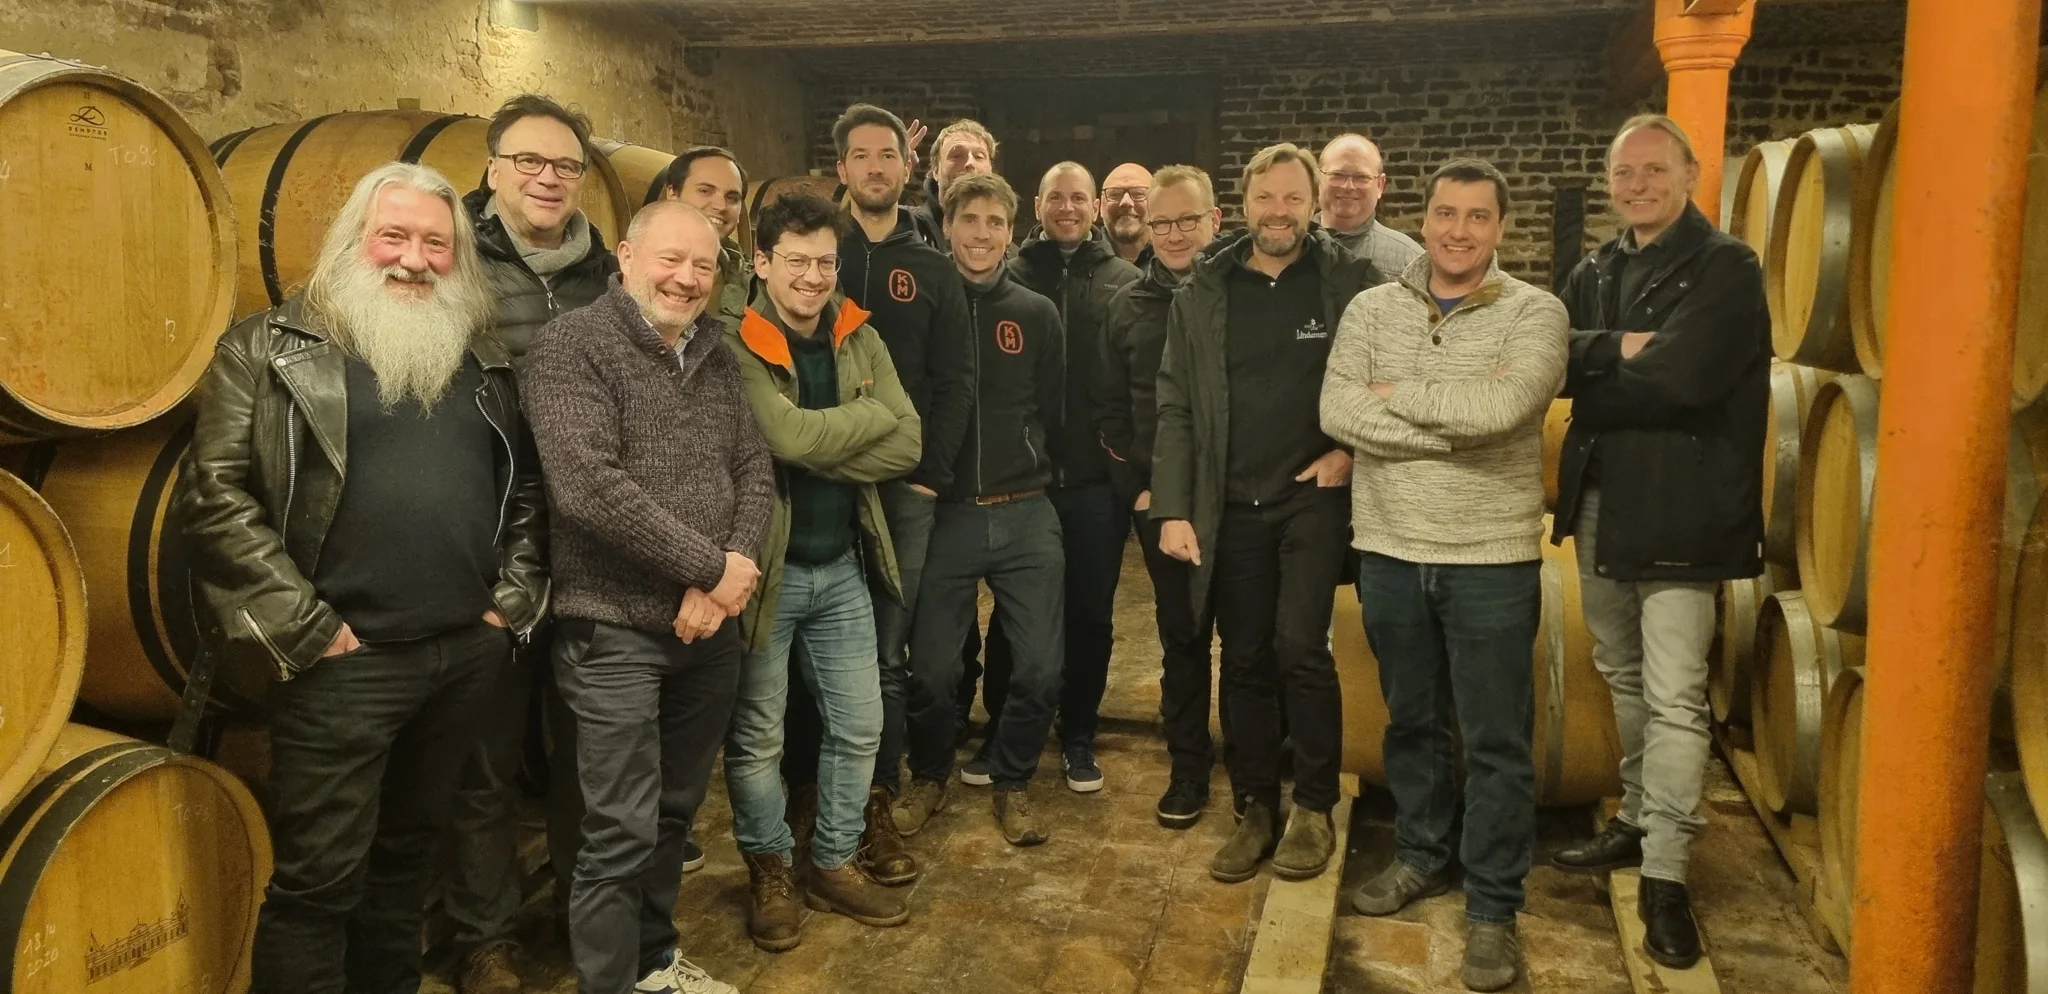 Brouwerij Kestemont joins The High Council for Artisanal Lambic Beers, and Toer de Geuze 2024